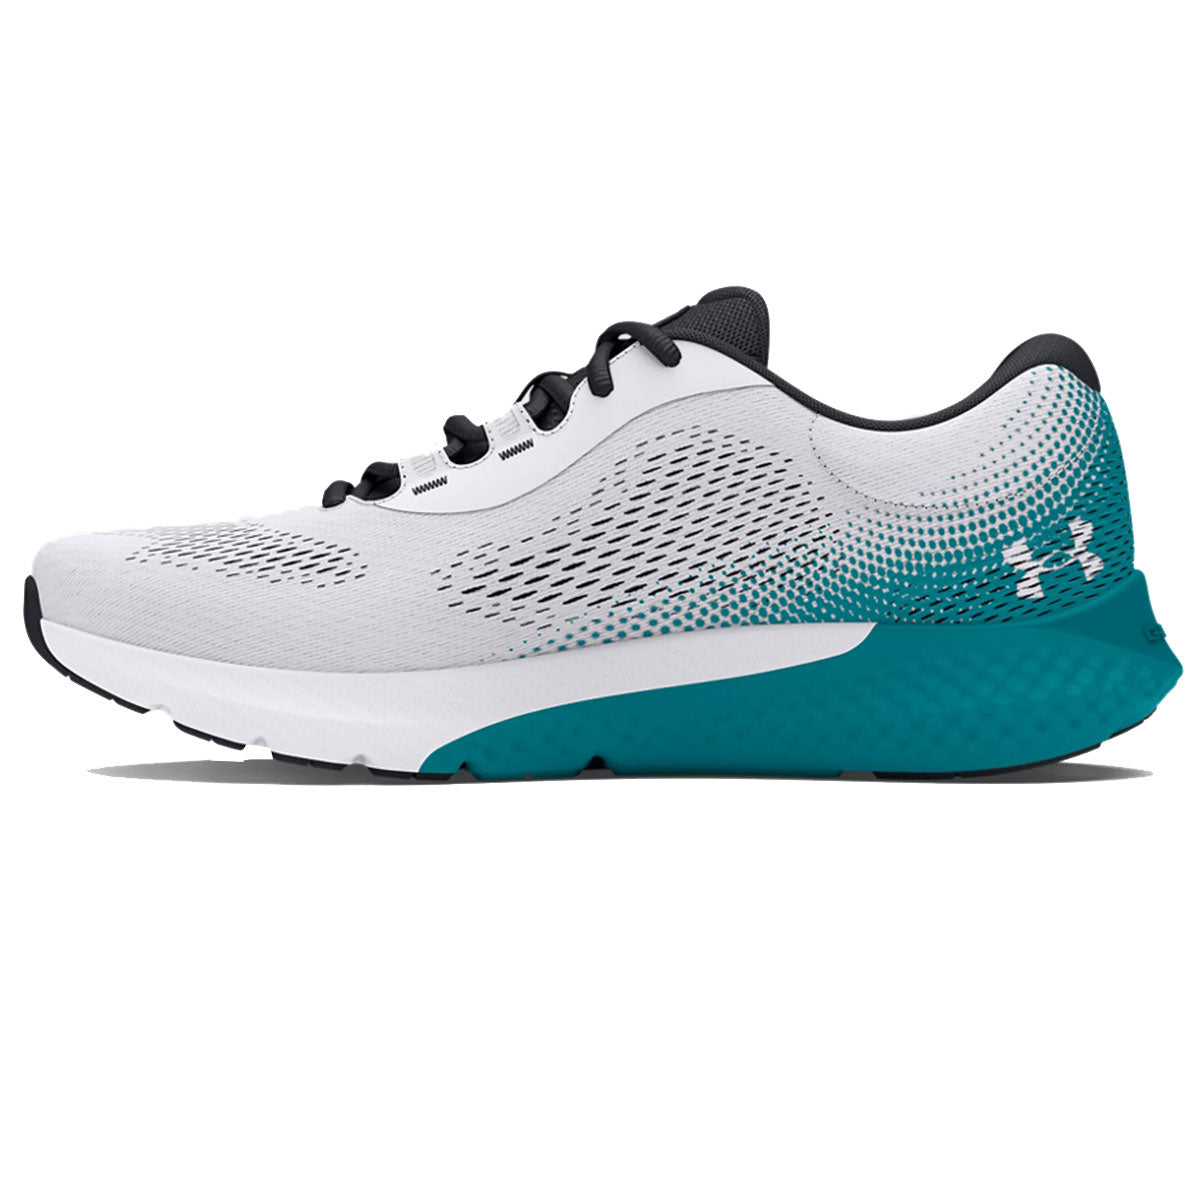 Under Armour Charged Rogue 4 Running Shoes - Mens - White/Circuit Teal